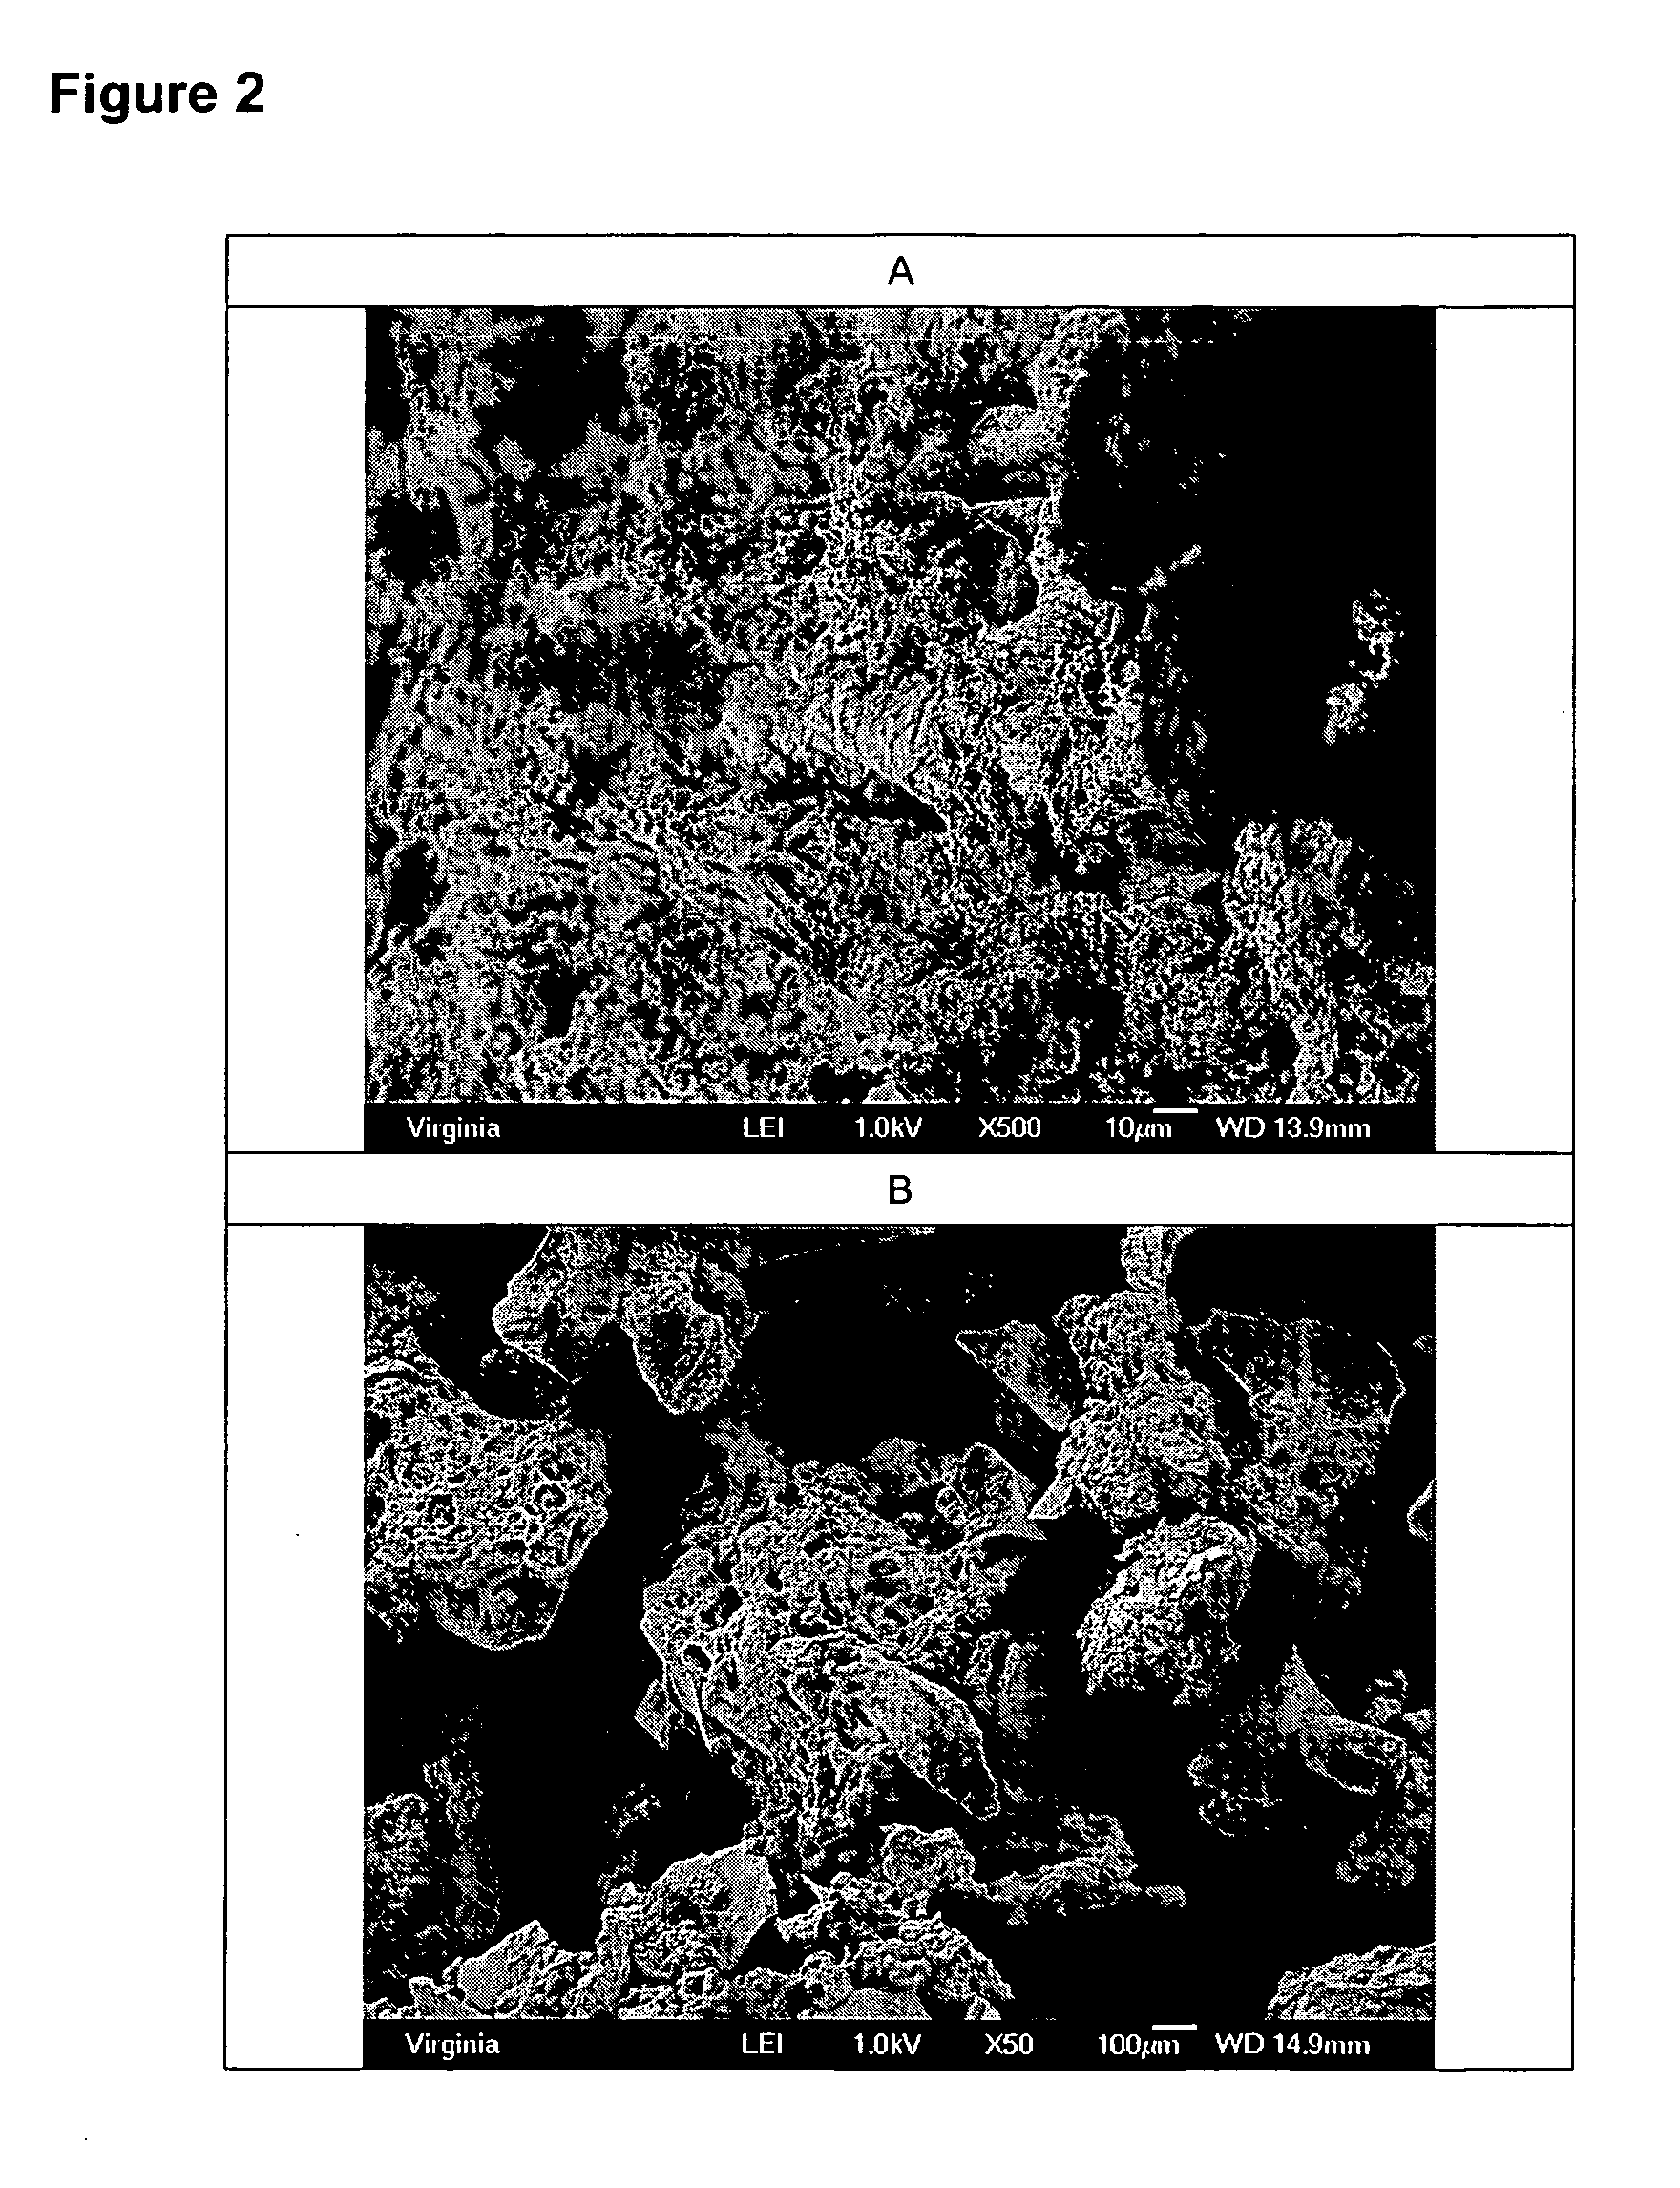 Compositions for repairing bone and methods for preparing and using such compositions